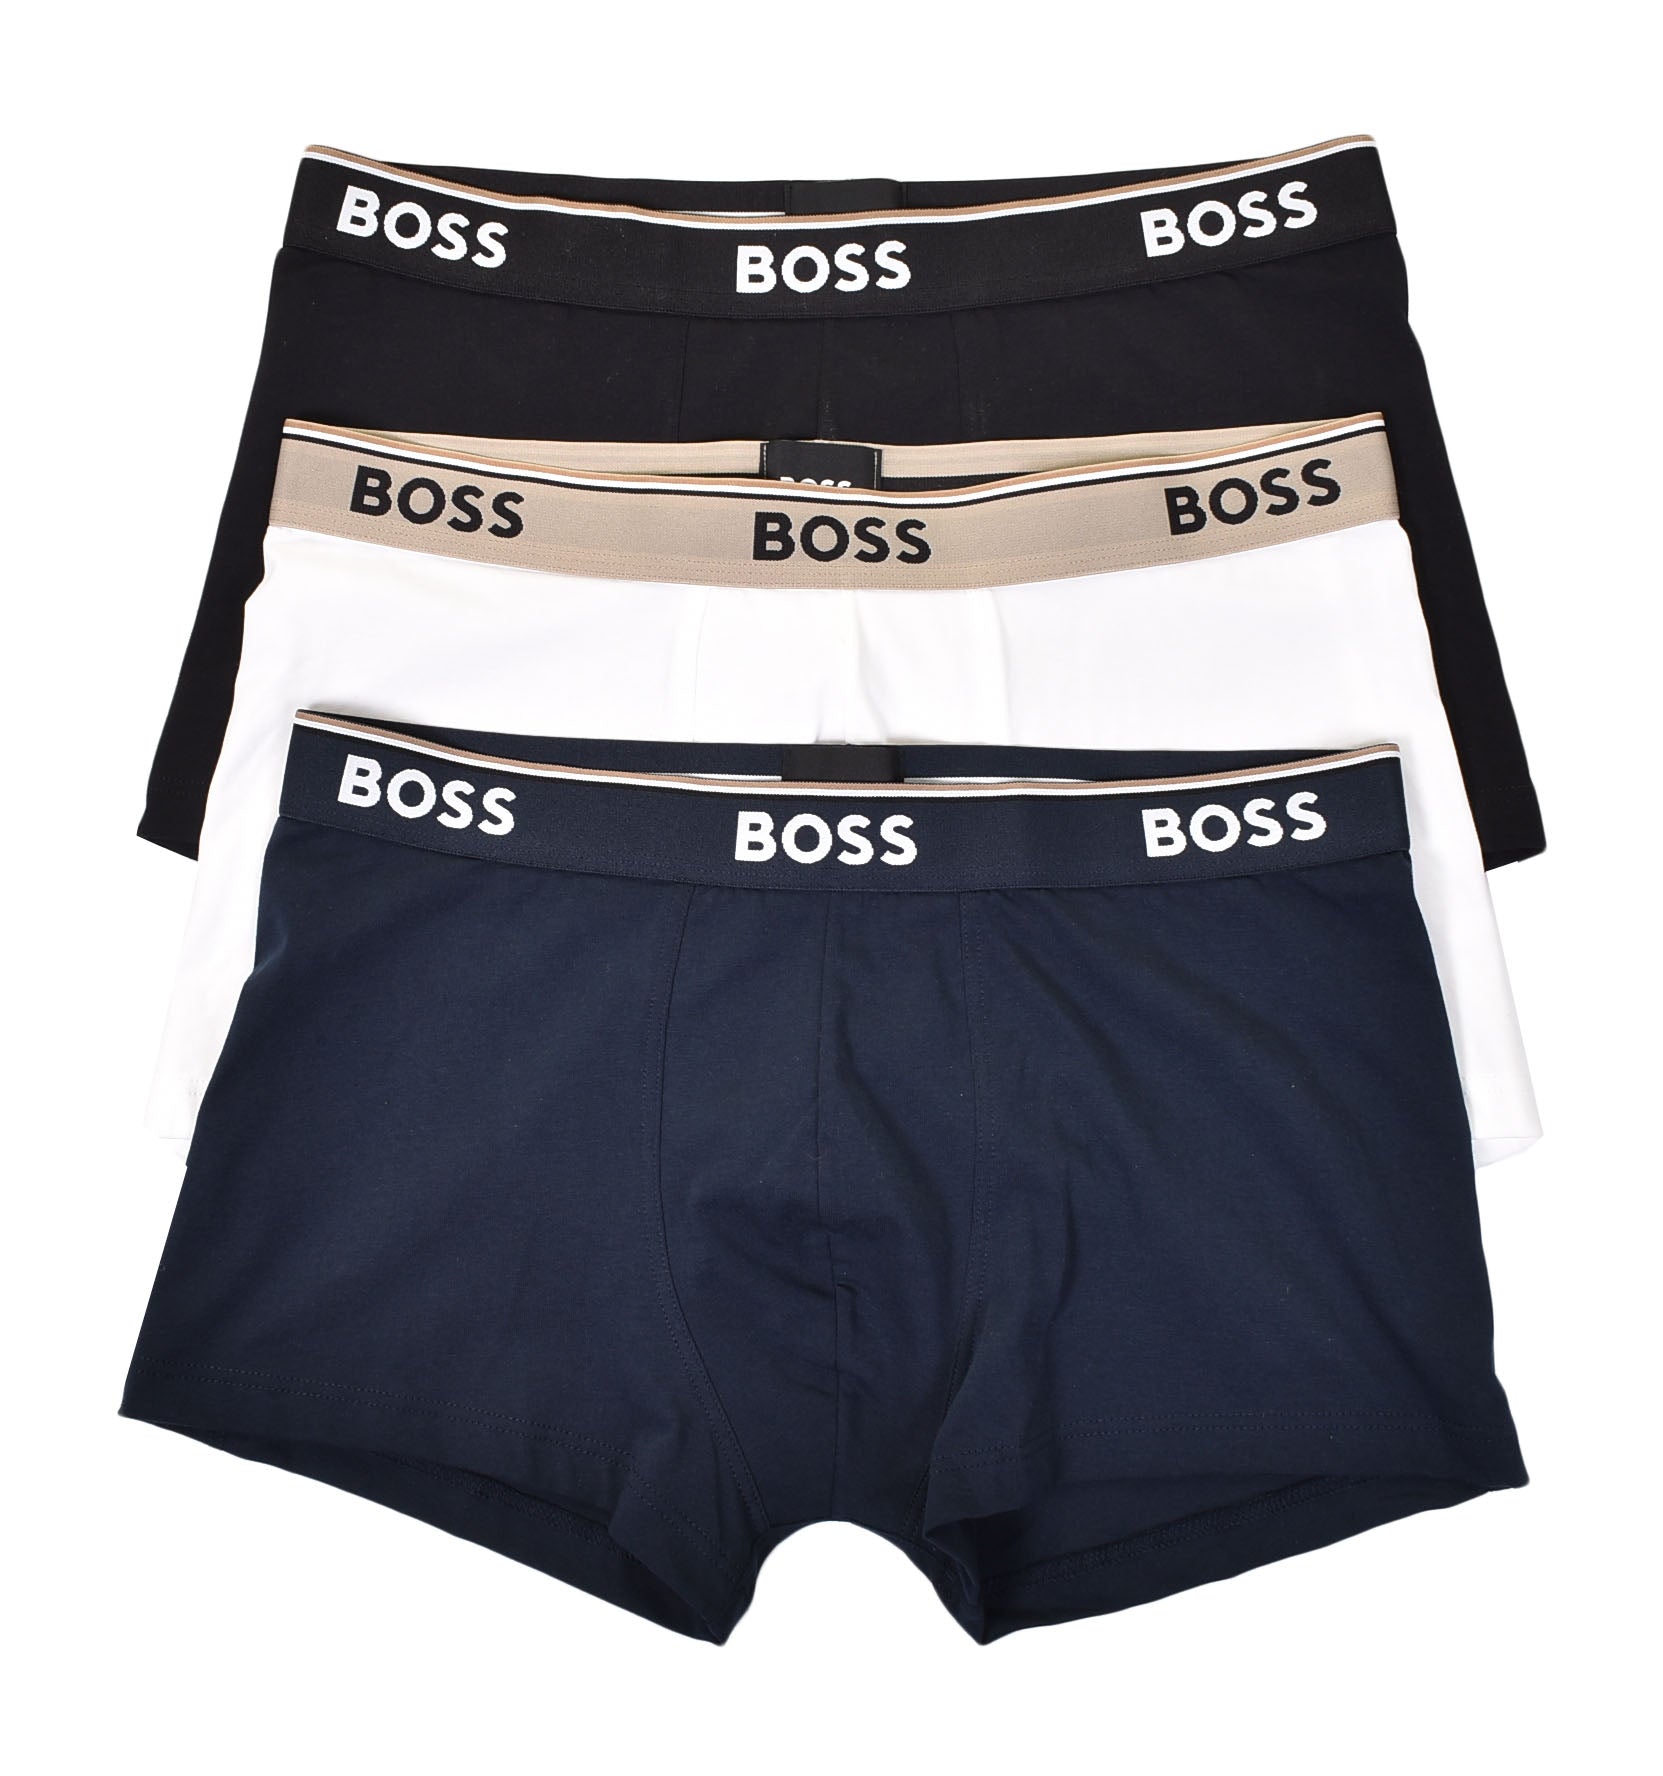 3 Pack Power Trunk Boxers 979 Blk/Blu/Wht